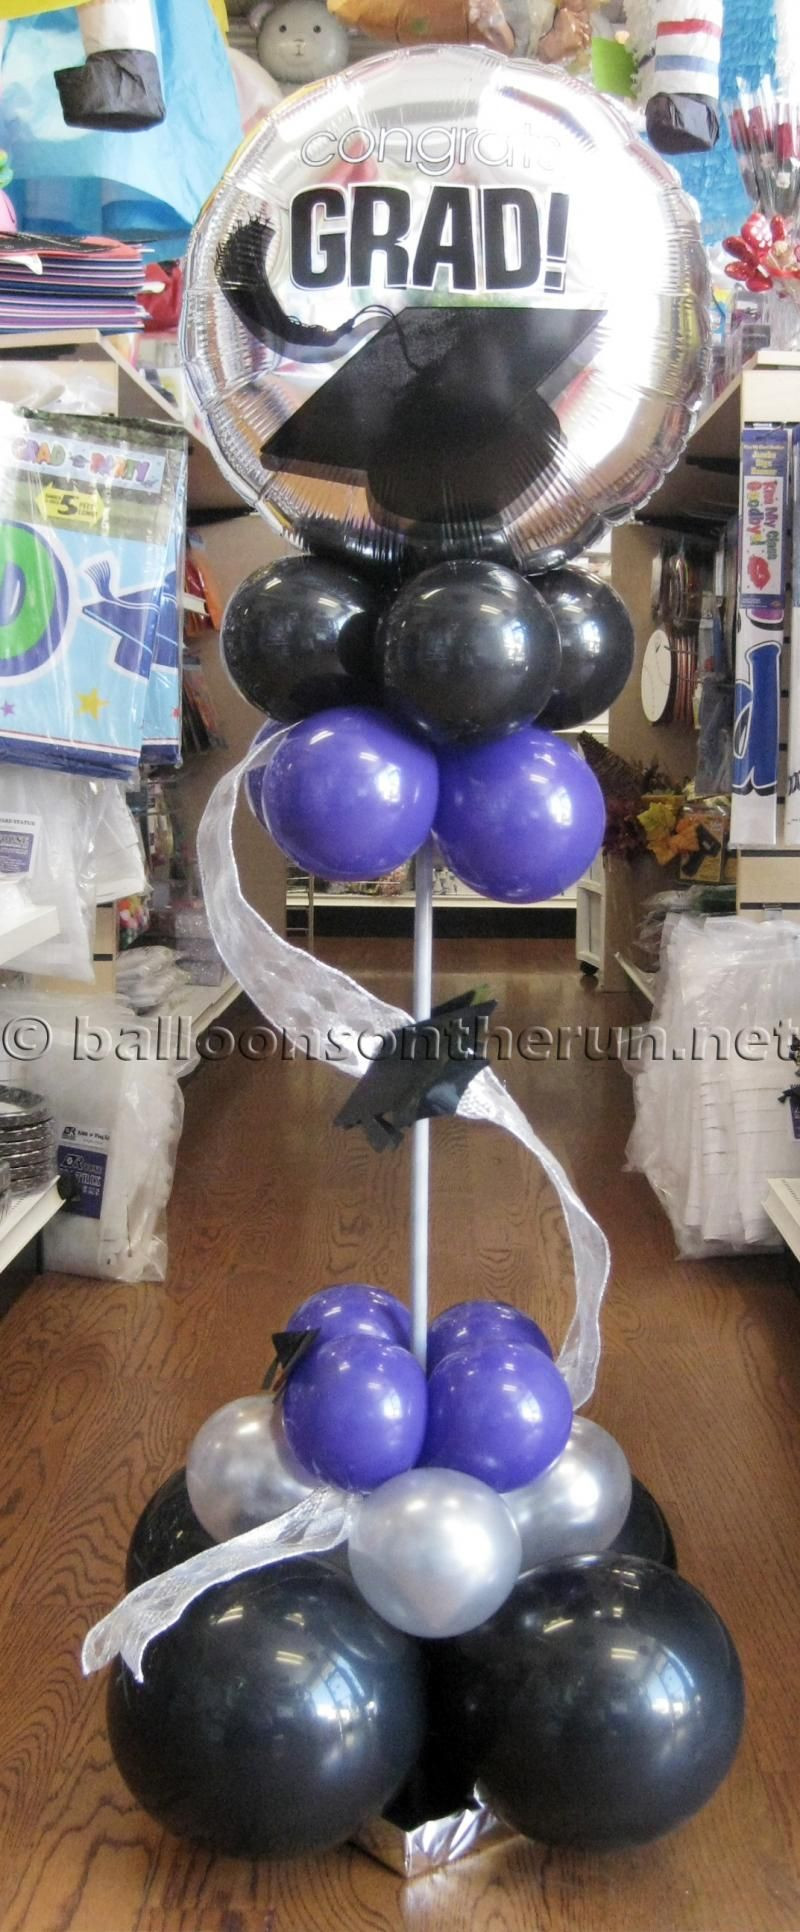 Graduation Party Balloon Ideas
 For outside Balloons on the Run Party Decorations R Us